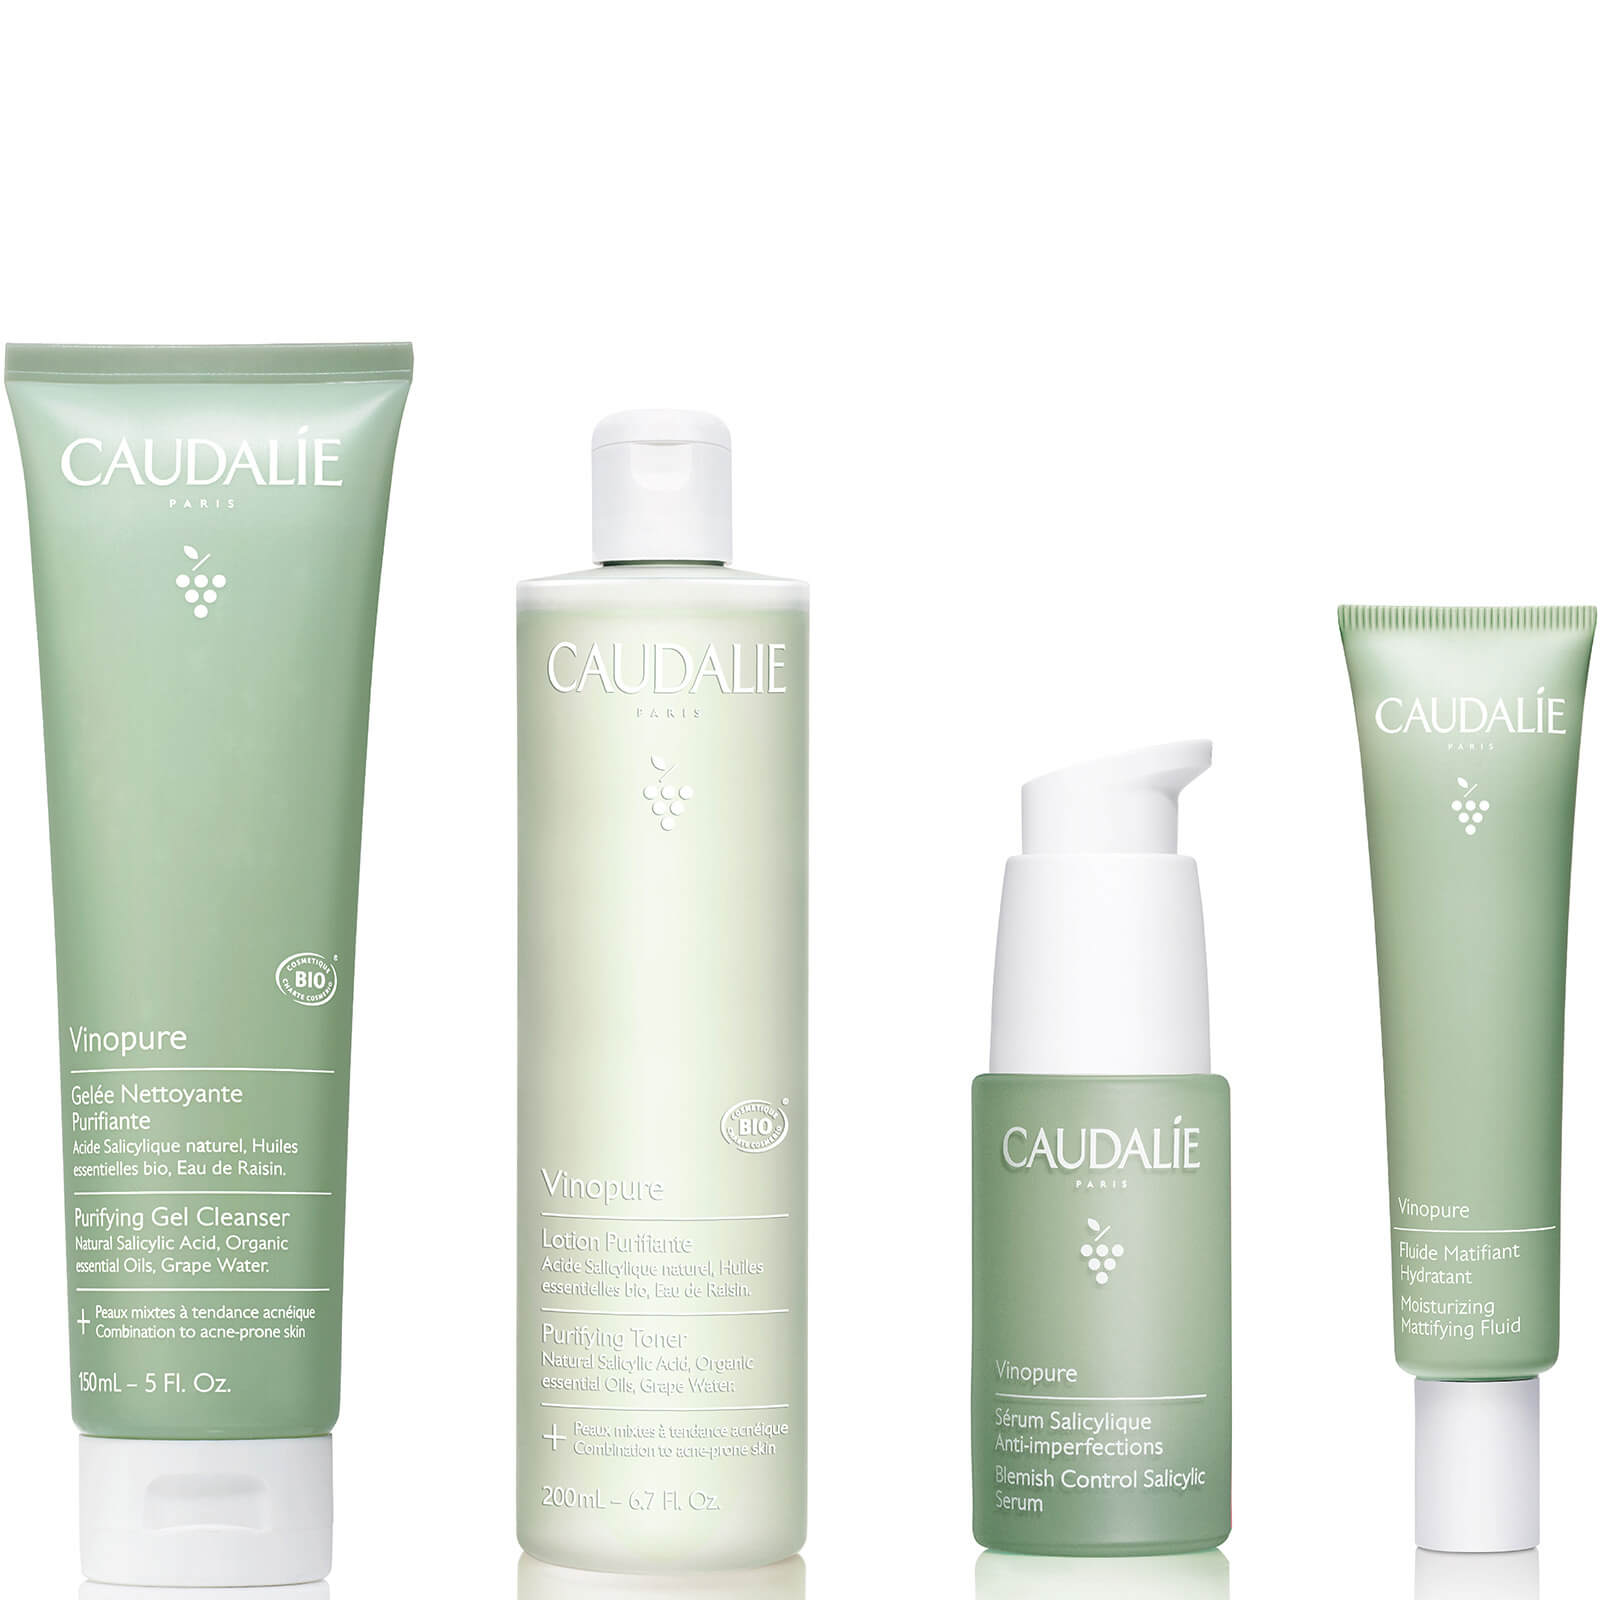 Caudalie 4 Steps for 4 Weeks Acne Prone Skin Programme (Worth PS96.00)